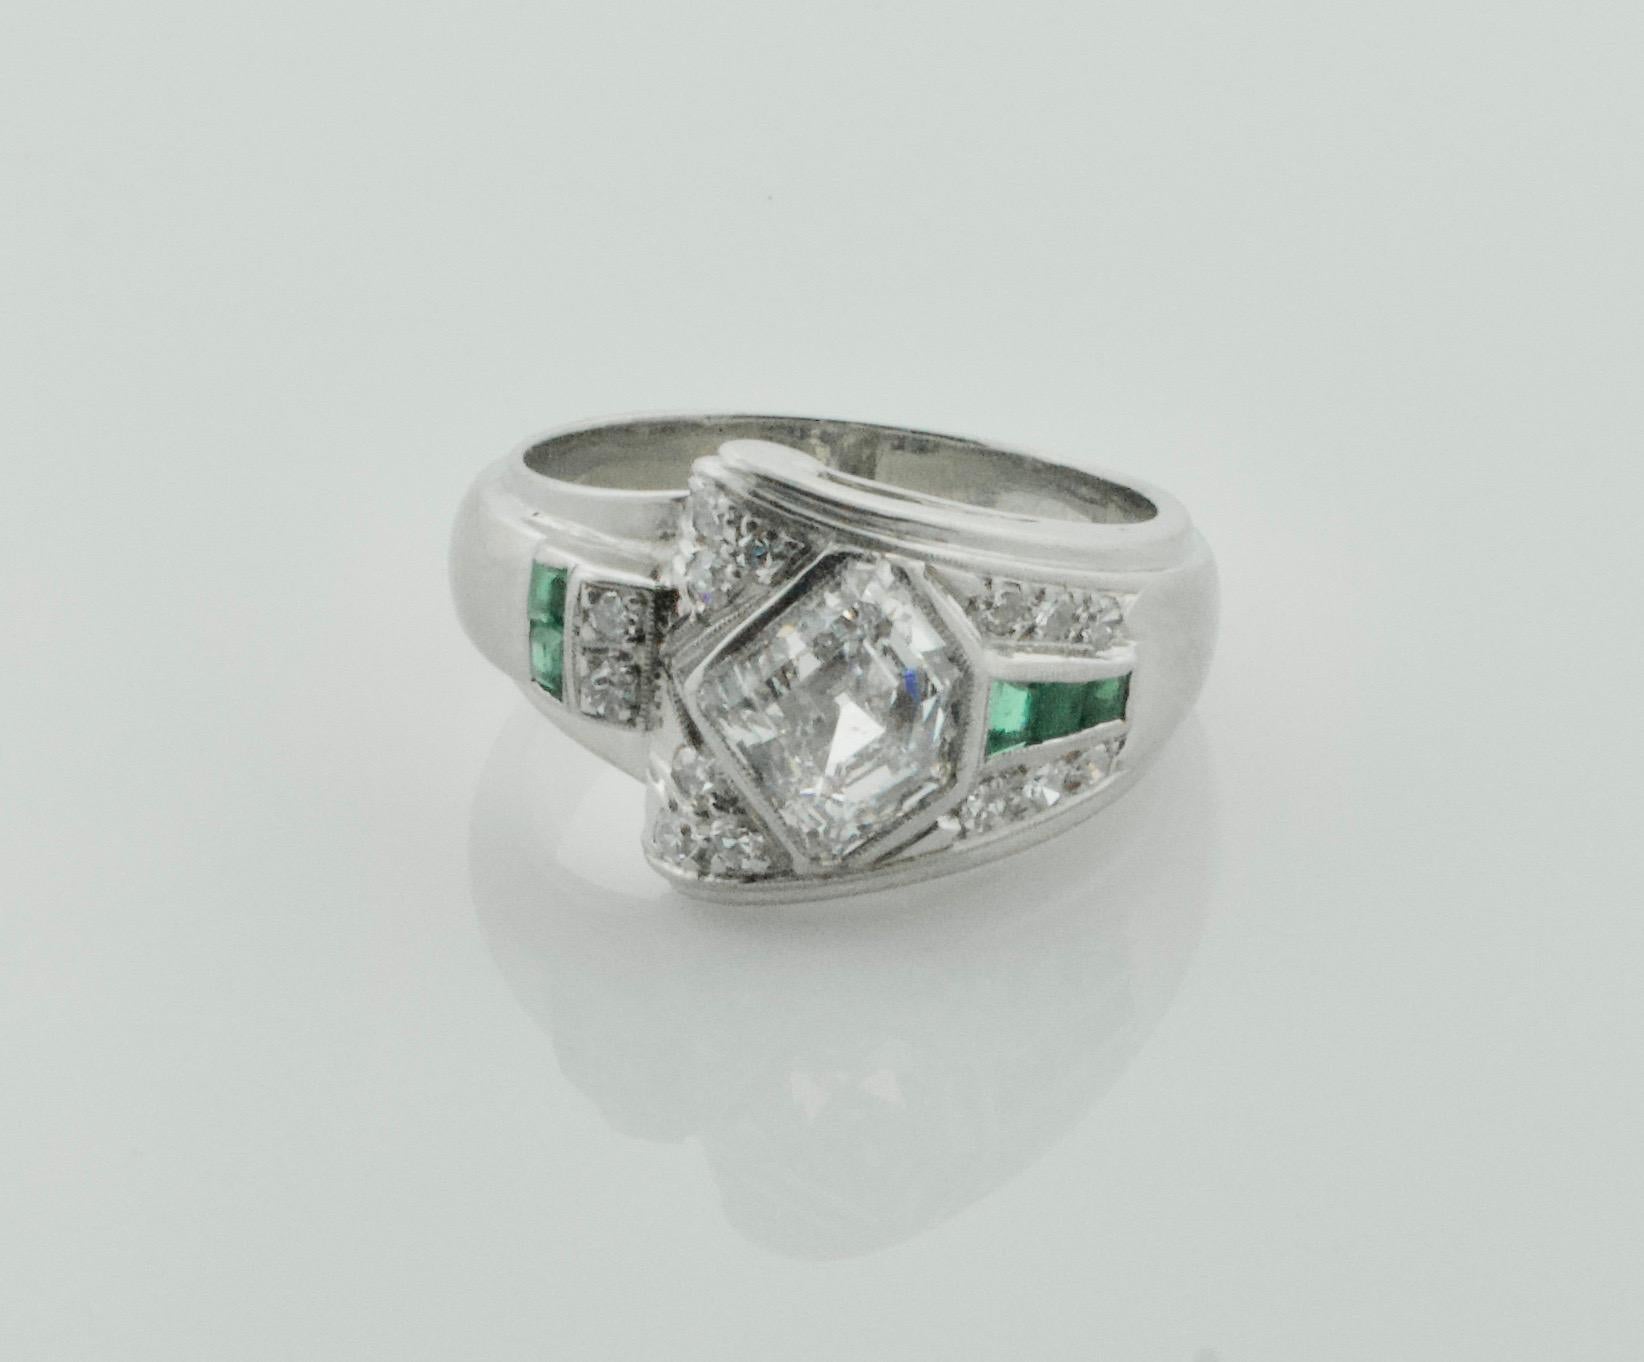 Rare 1940's Diamond and Emerald Ring in Palladium 1.83 E - VS1 Shield Cut
One Shield Cut Diamond weighing 1.83 carats [E - VS1]  GIA certed
Fourteen Single Cut Cut Diamonds weighing .20 carats approximately [GH VVS - VS1]
Five Calibrated